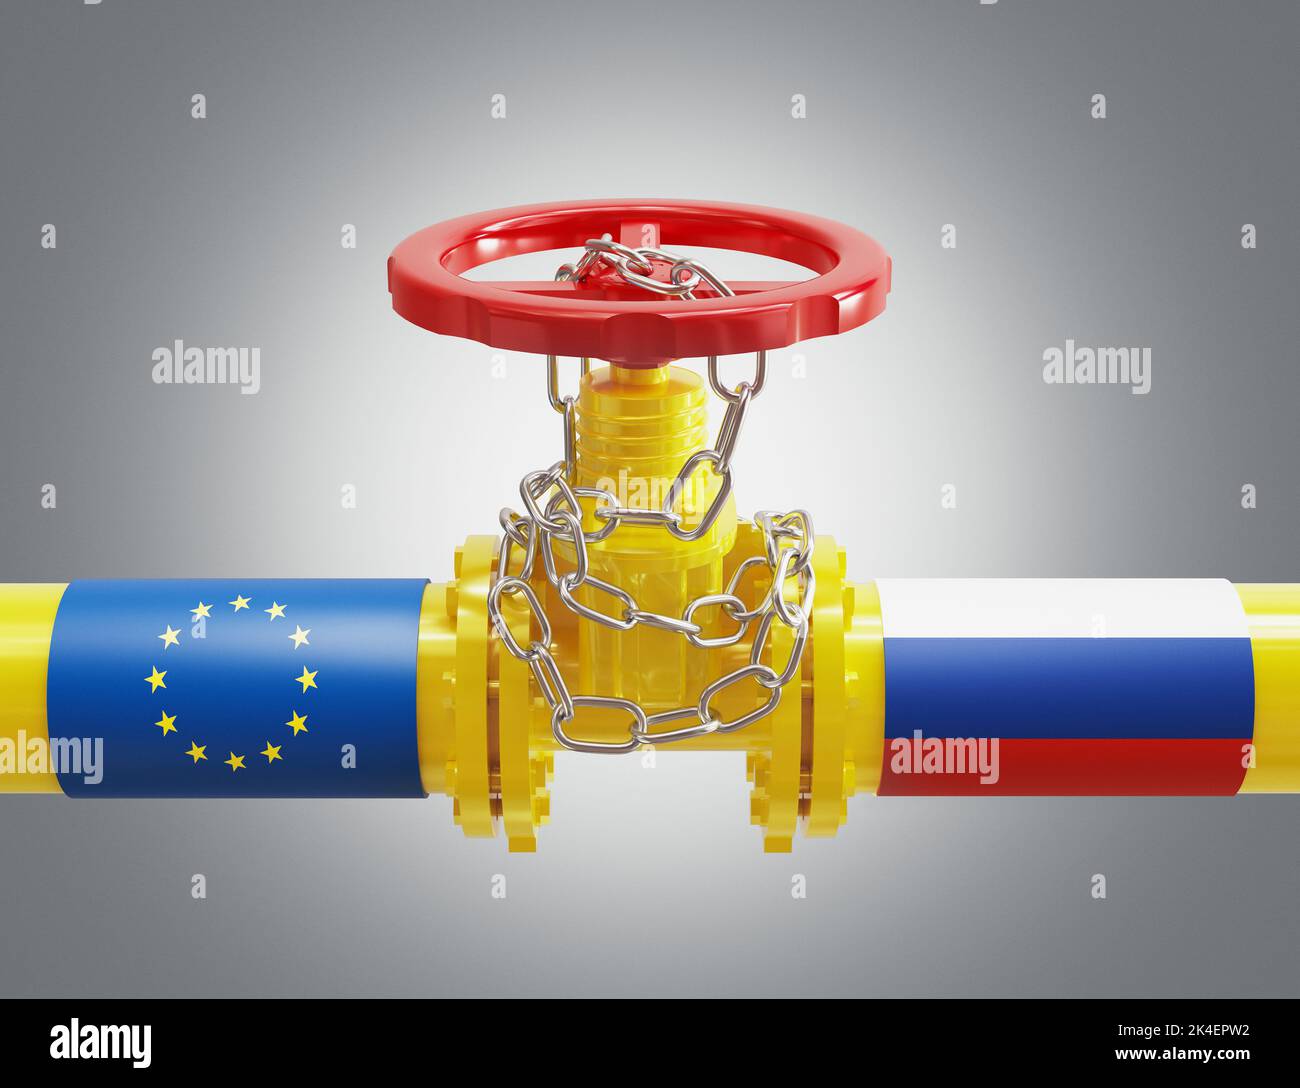 EU Europe and Russia oil and gas sanctions, stand-off and war. Squeezed gas pipe symbolizes the LNG embargo, crisis and upcoming price rises., 3d illu Stock Photo